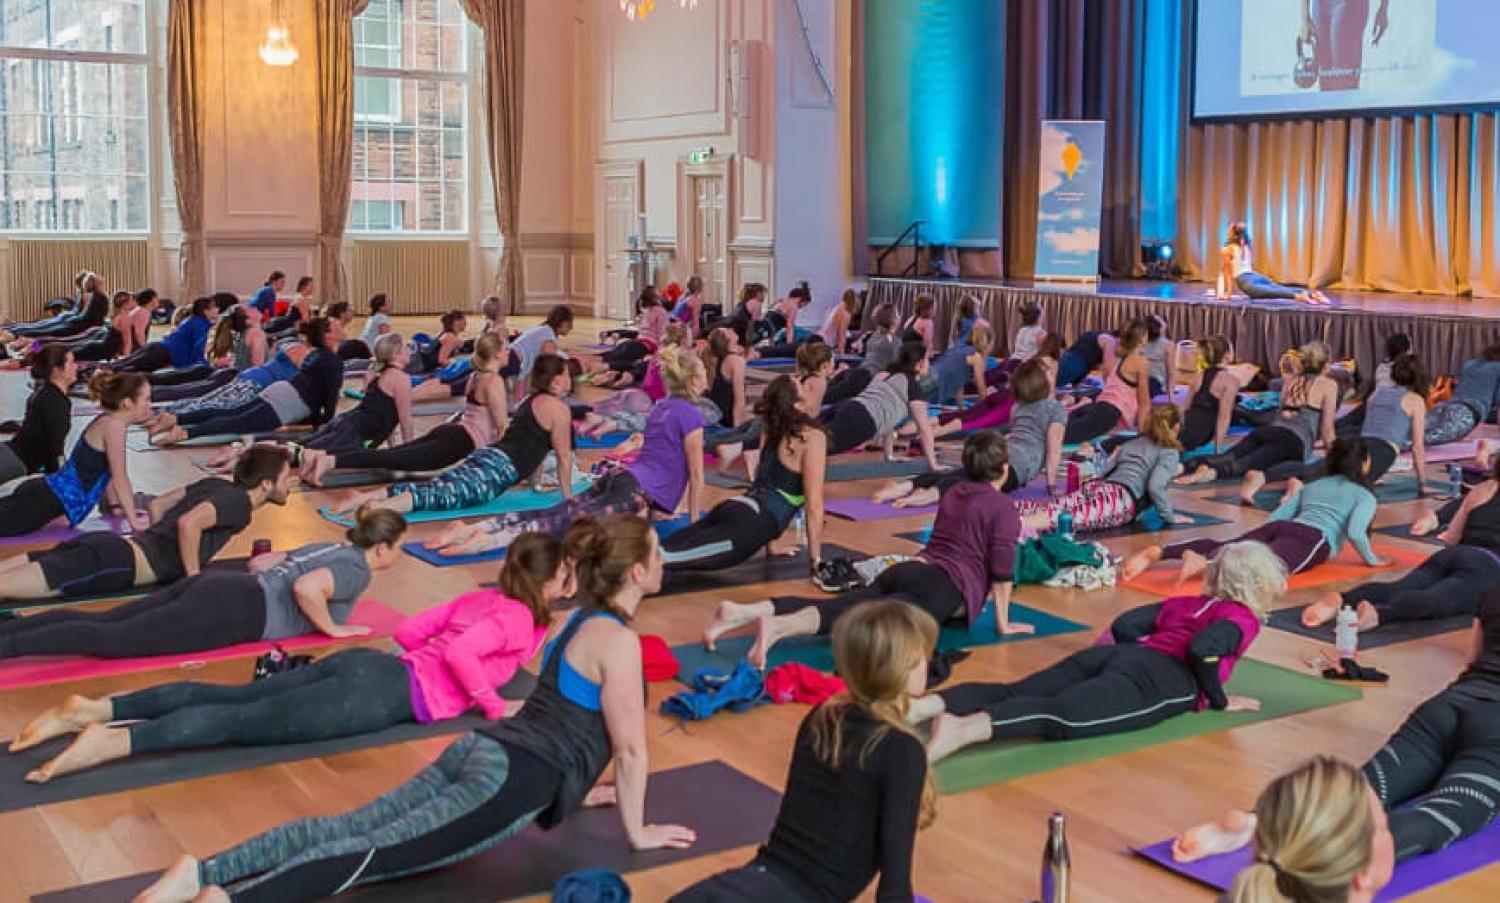 Yoga Class at the Wellbeing Festival in the Music Hall at the Assembly Rooms.